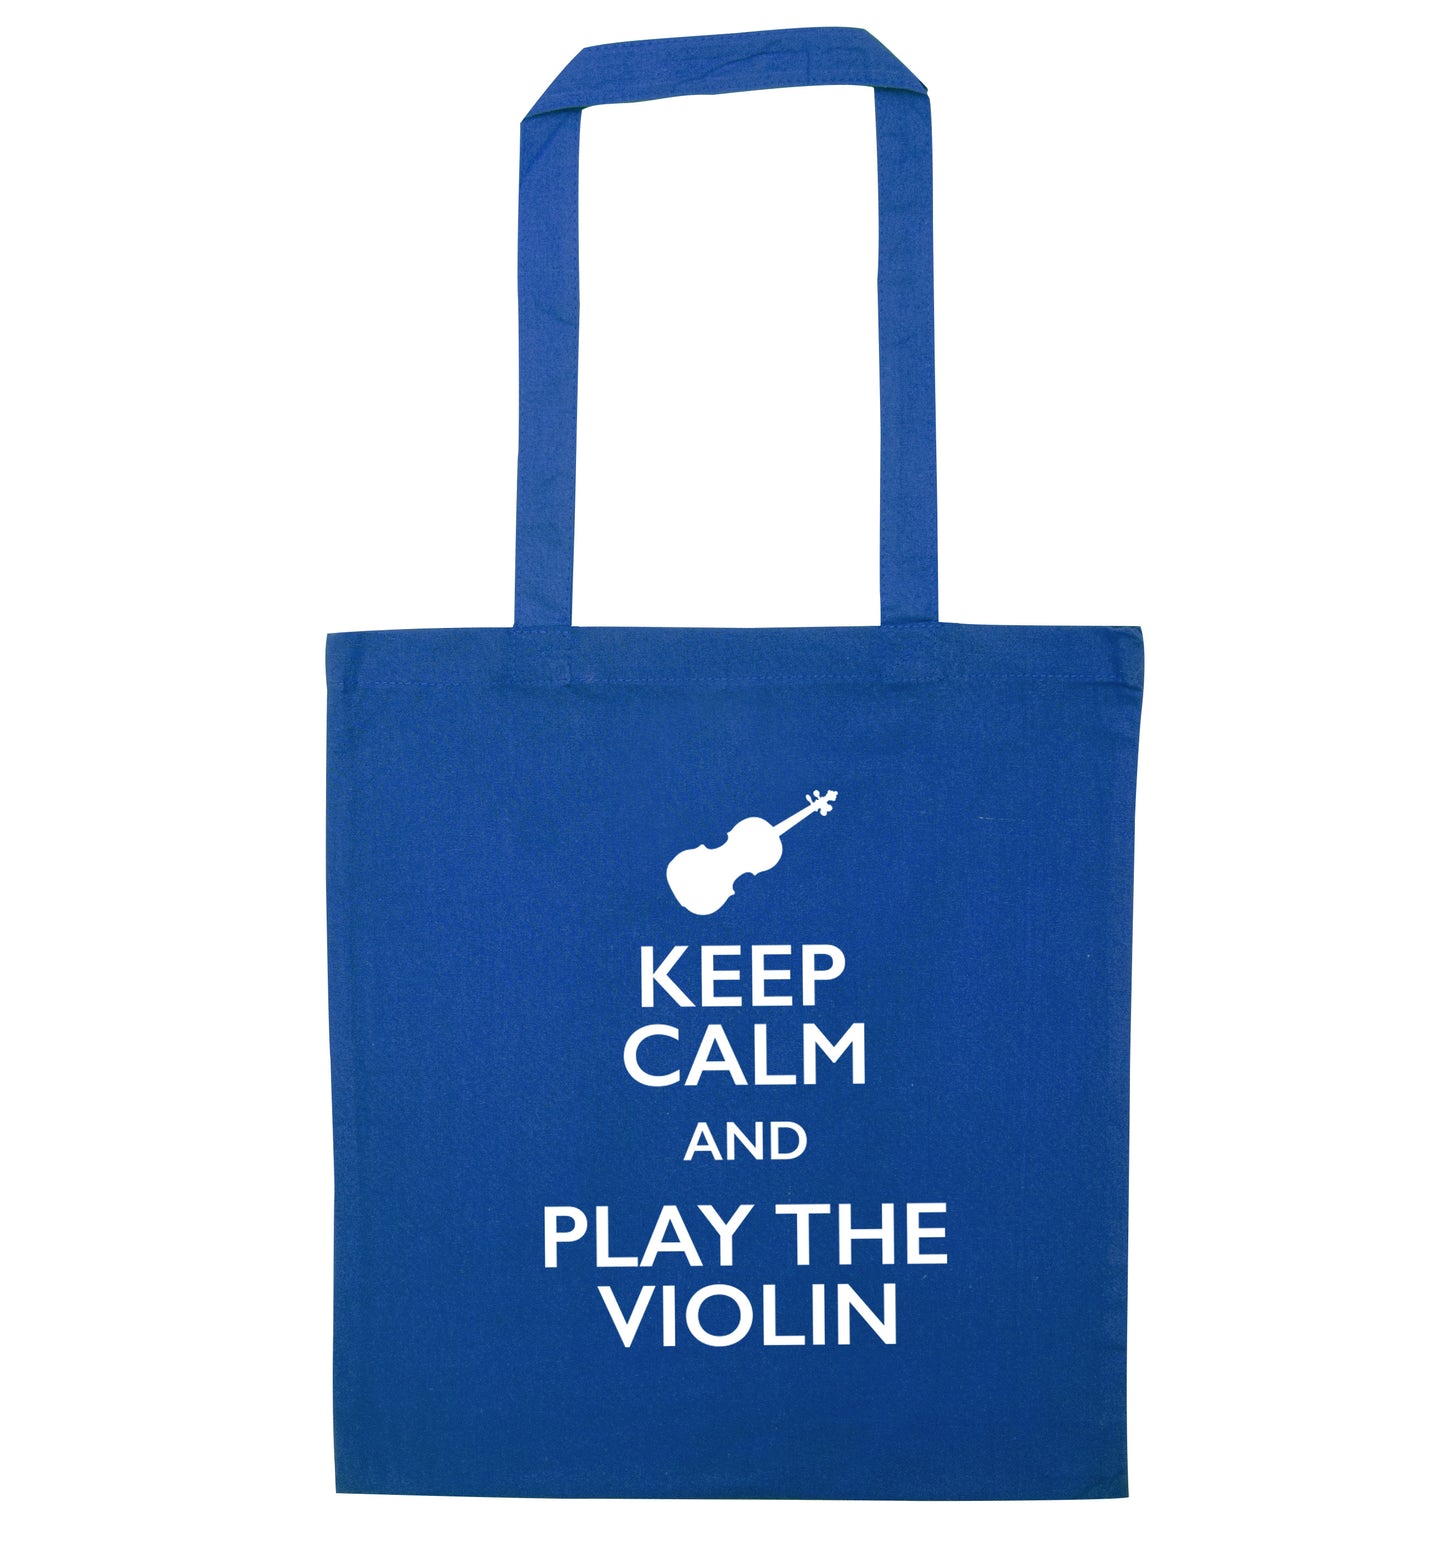 Keep calm and play the violin blue tote bag